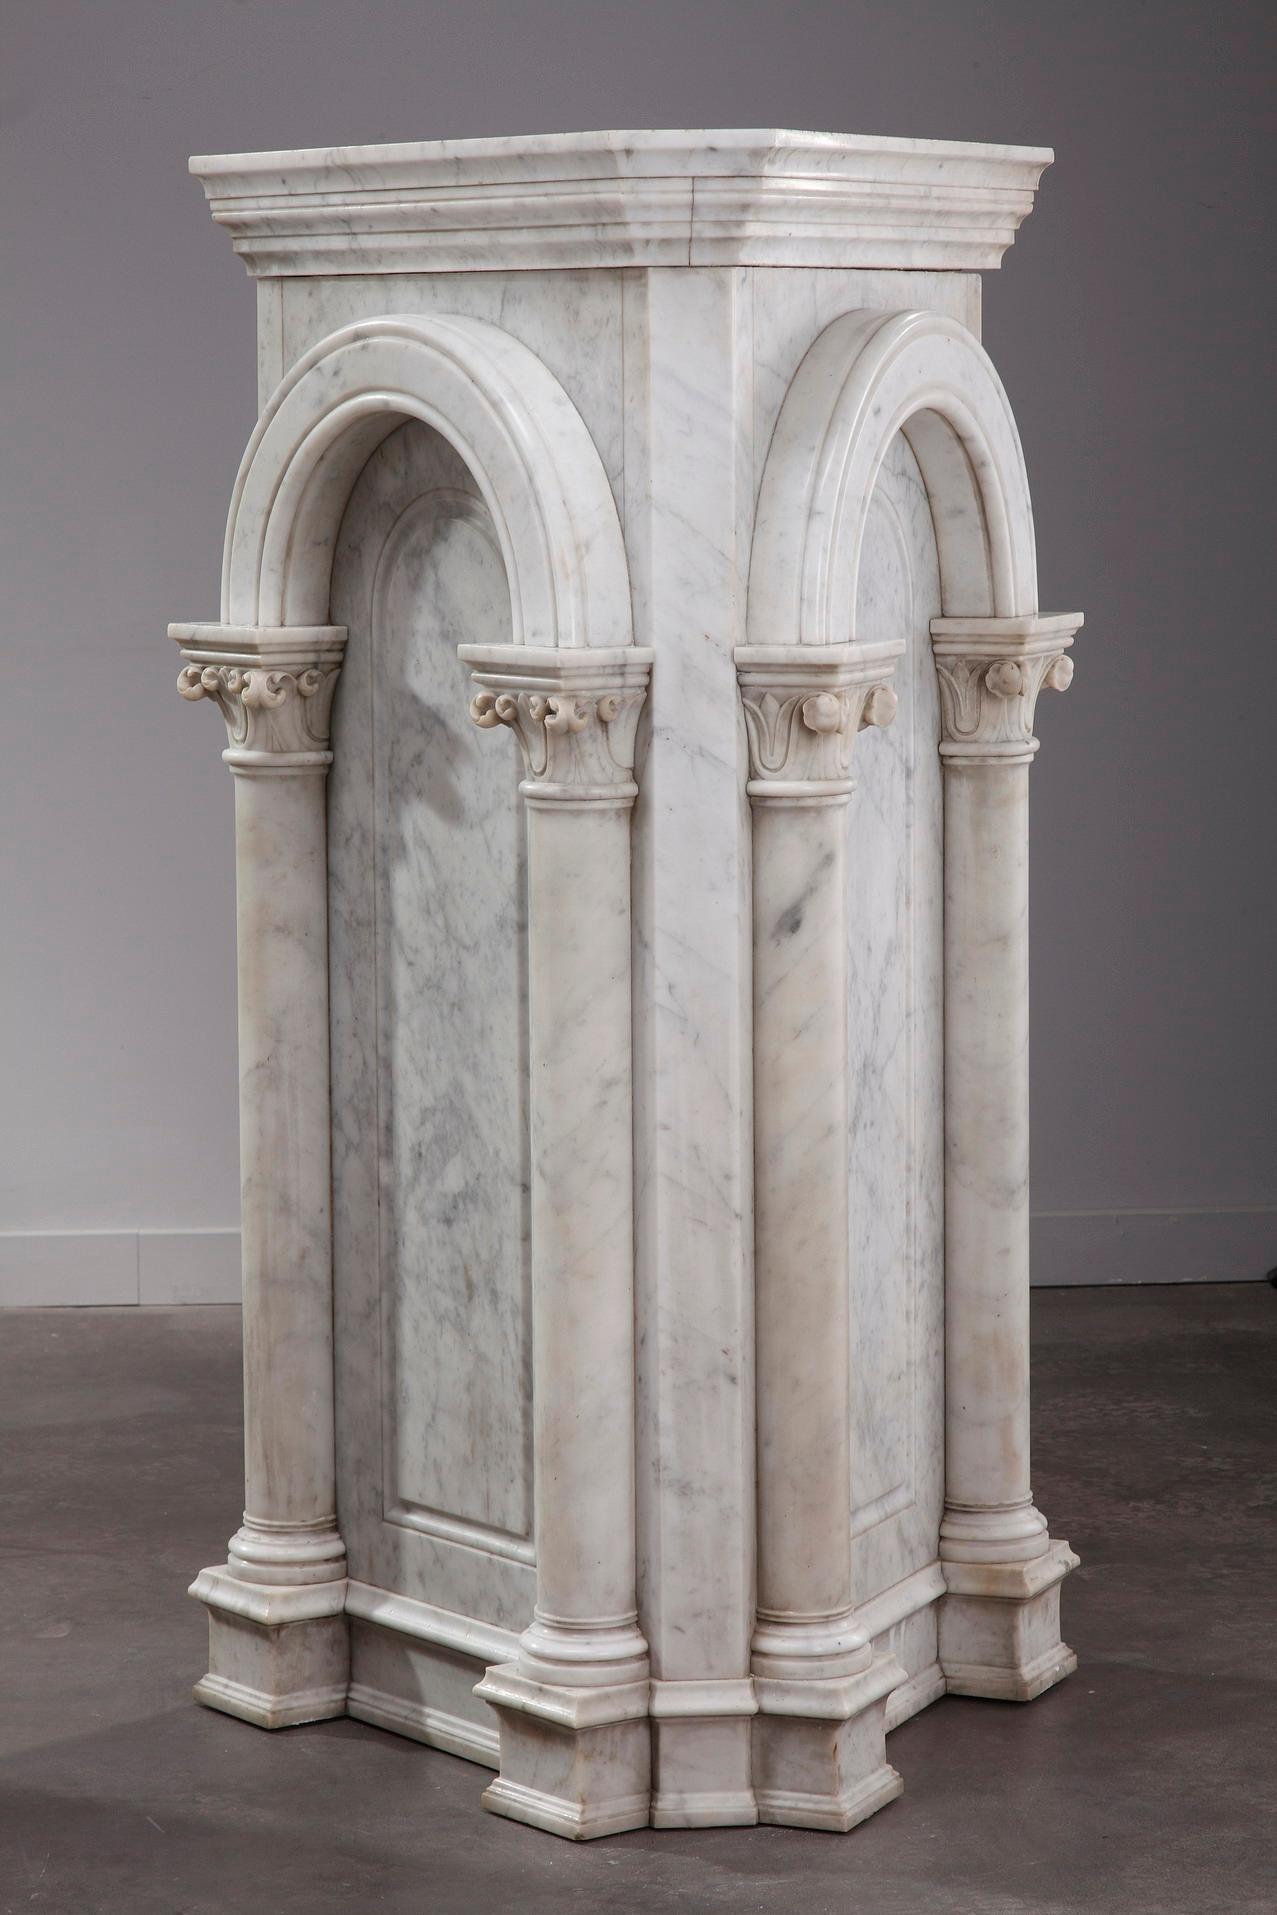 Mid-19th century pair of neoclassical white marble pedestals designed in an architectural manner. The entablature of each stand is supported by an arch, and the arch supported by two columns with Corinthian capitals. The scheme is classical,